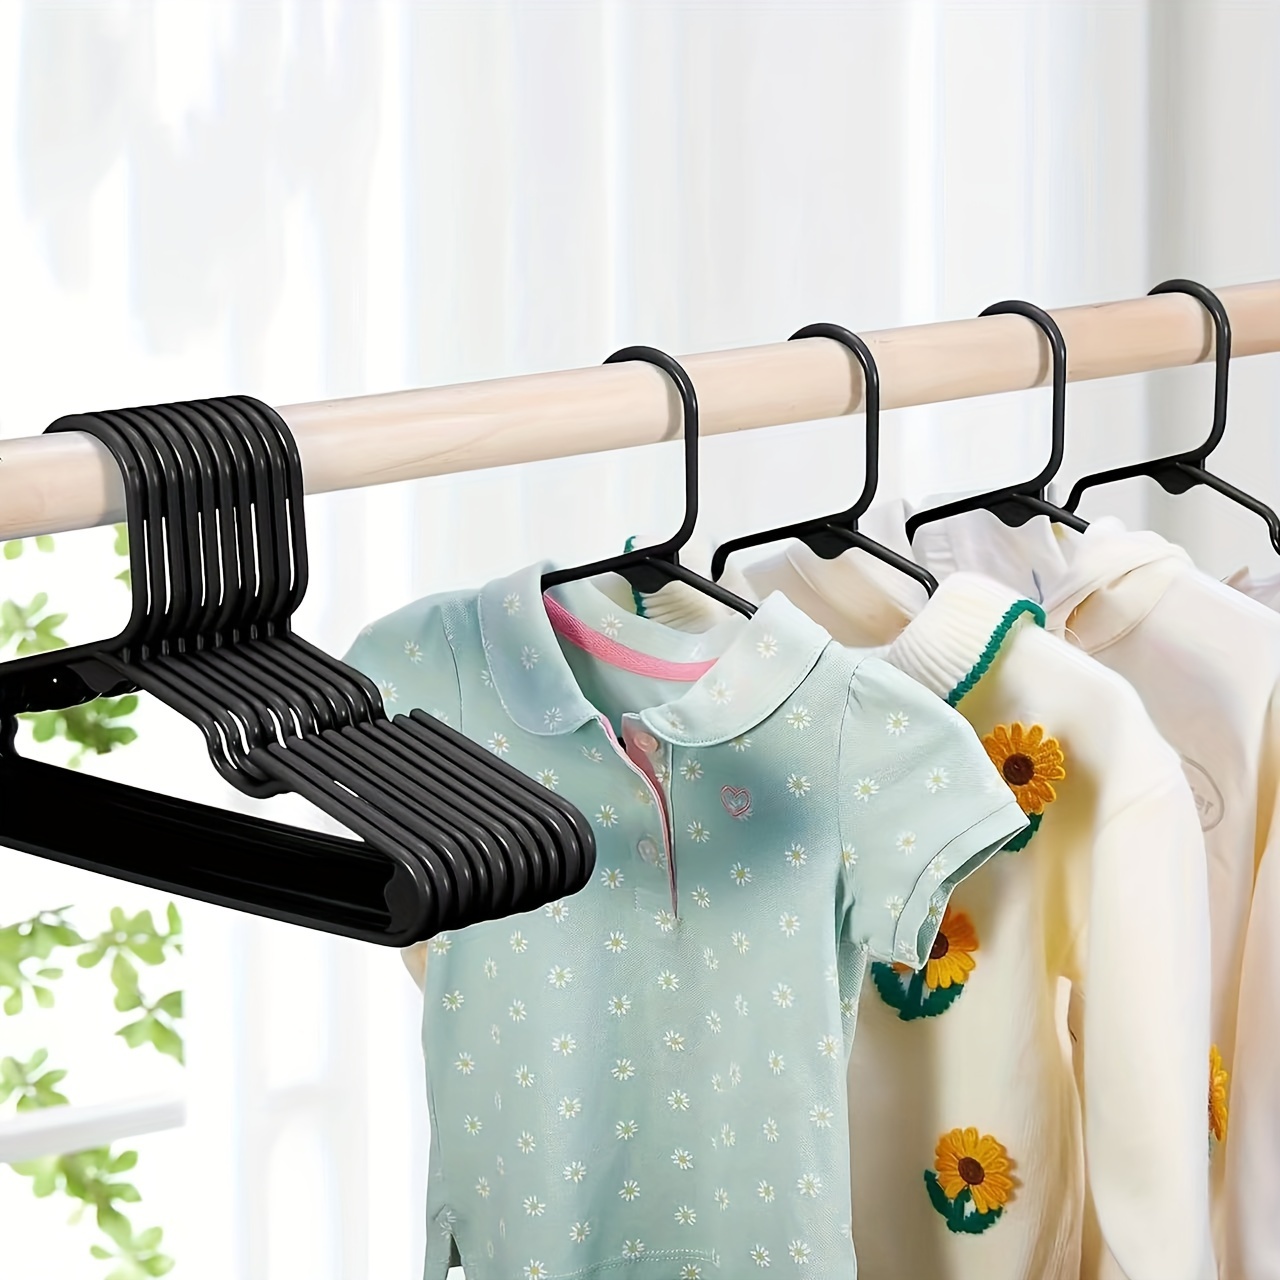 

10/50pcs Baby Clothes Storage Hangers, Kid Clothes Plastic Drying Racks, Durable Anti-slip Clothes Drying Racks, Household Storage Organization For Bedroom, Closet, Wardrobe, Home, Dorm